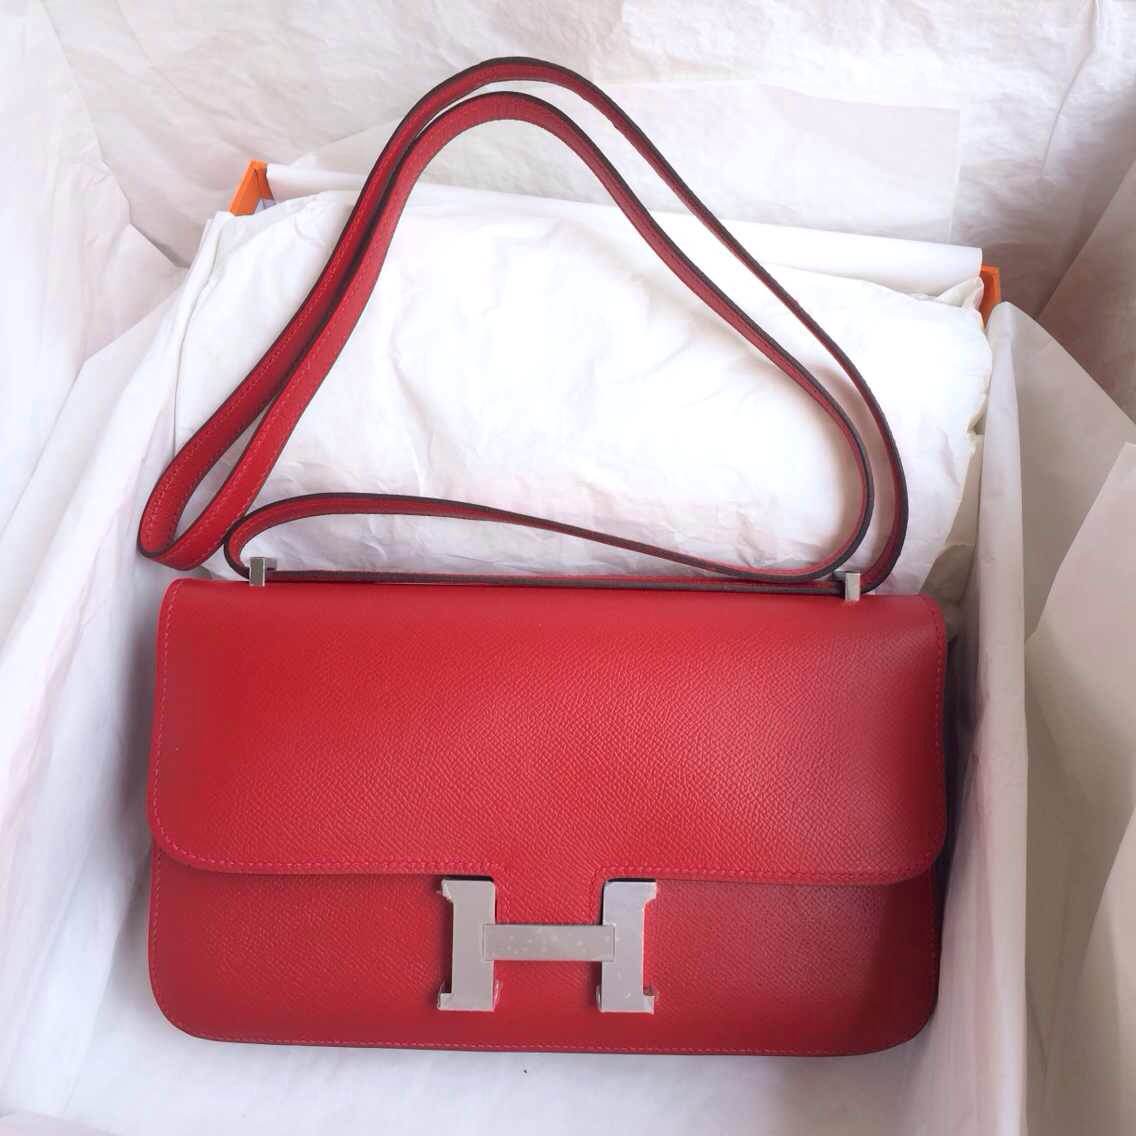 Hermes Constance Bag 26cm Q5 Candy Red Epsom Leather Silver/Gold Hardware